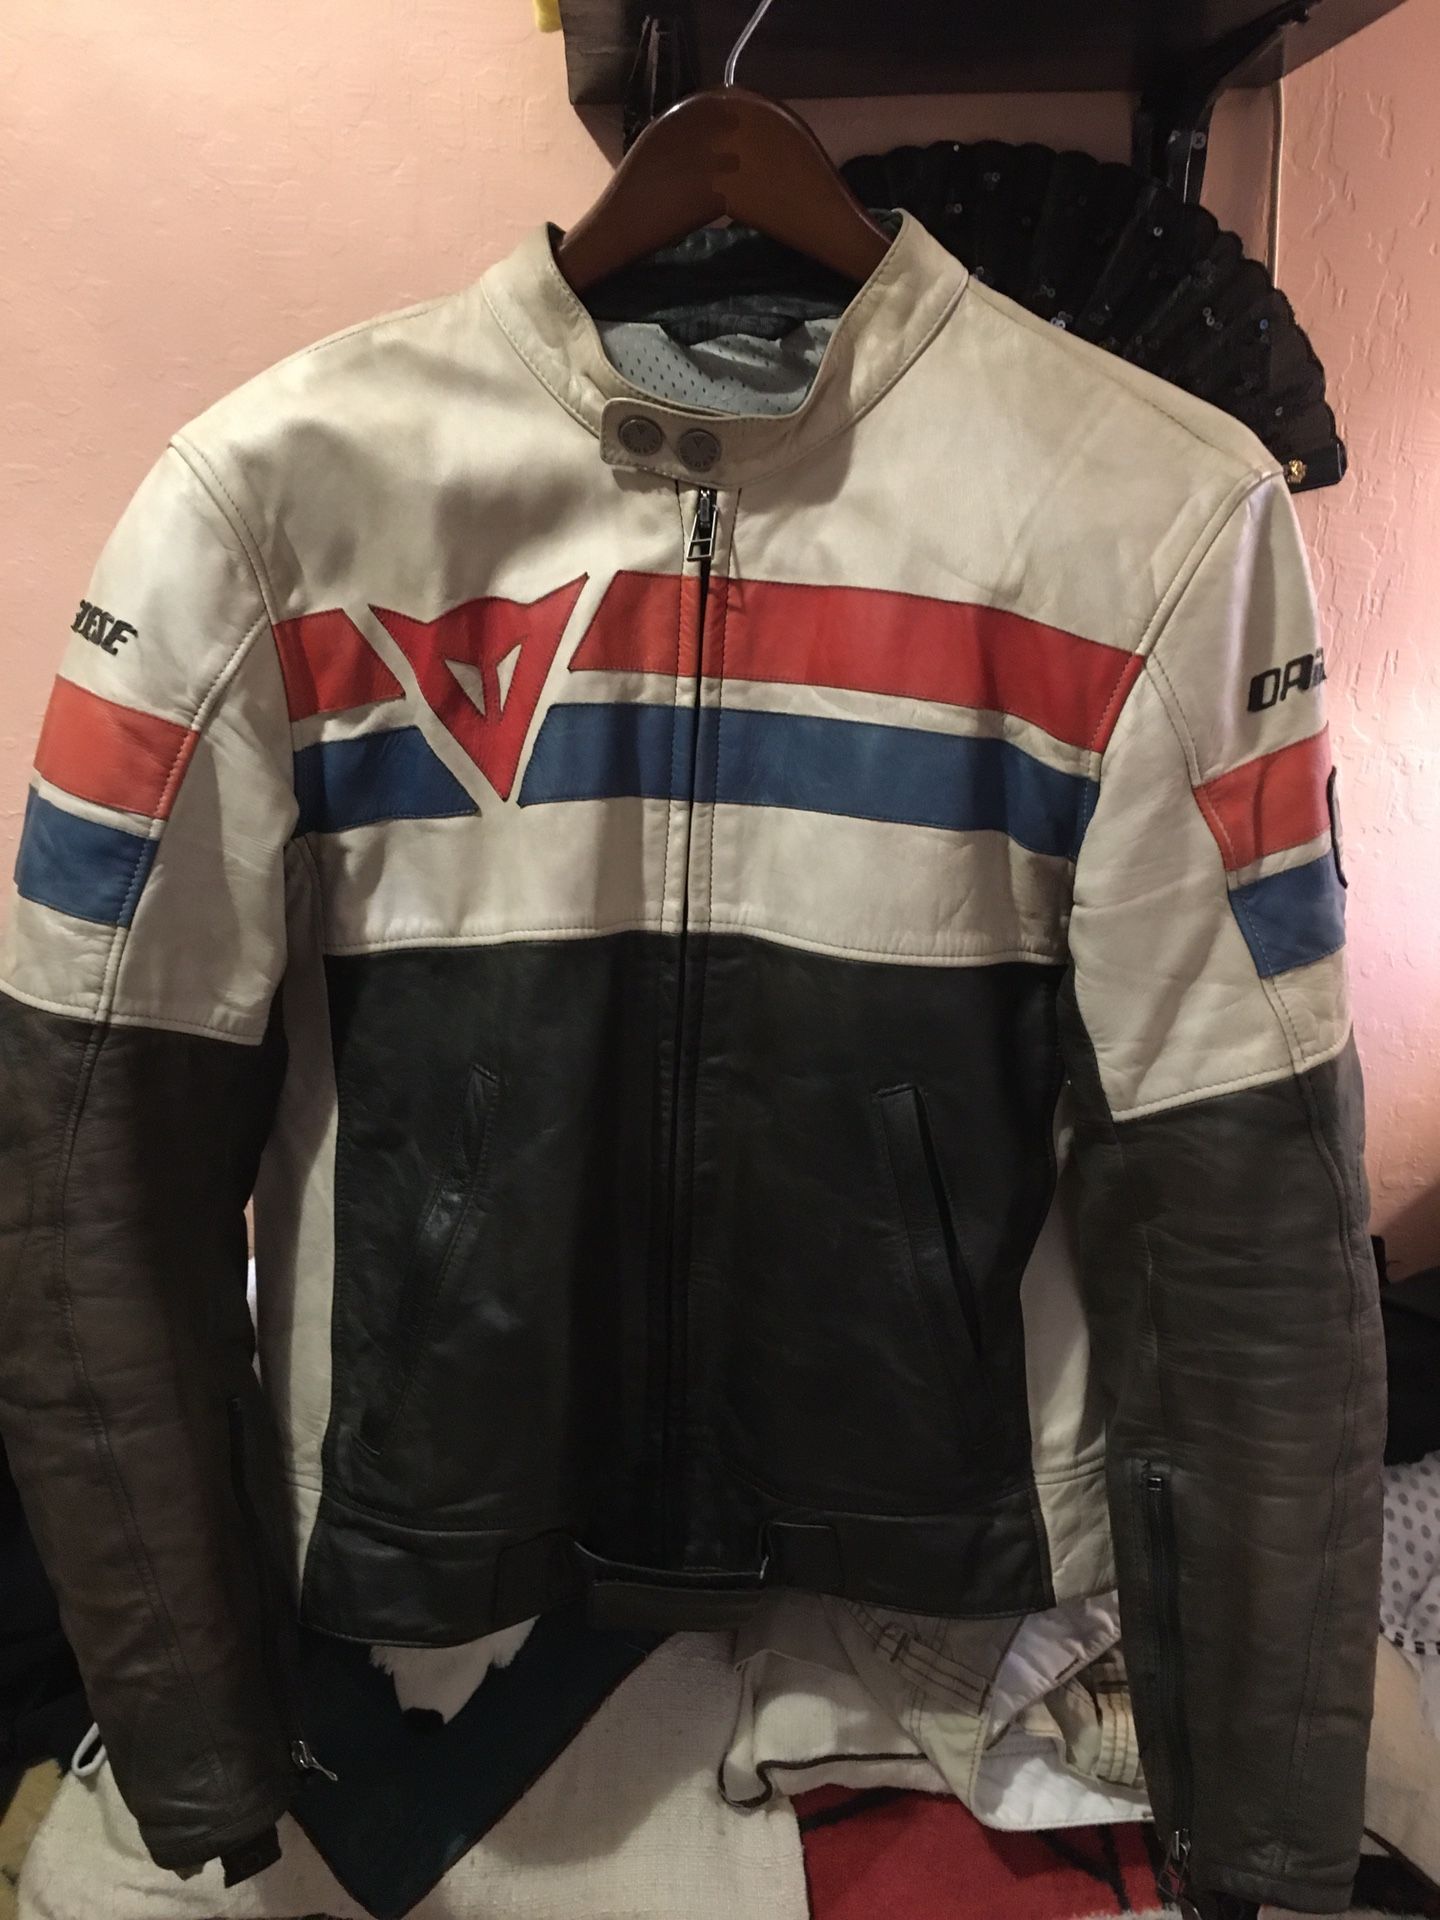 Motorcycle Dianese 1972 Leather Jacket w/pads included